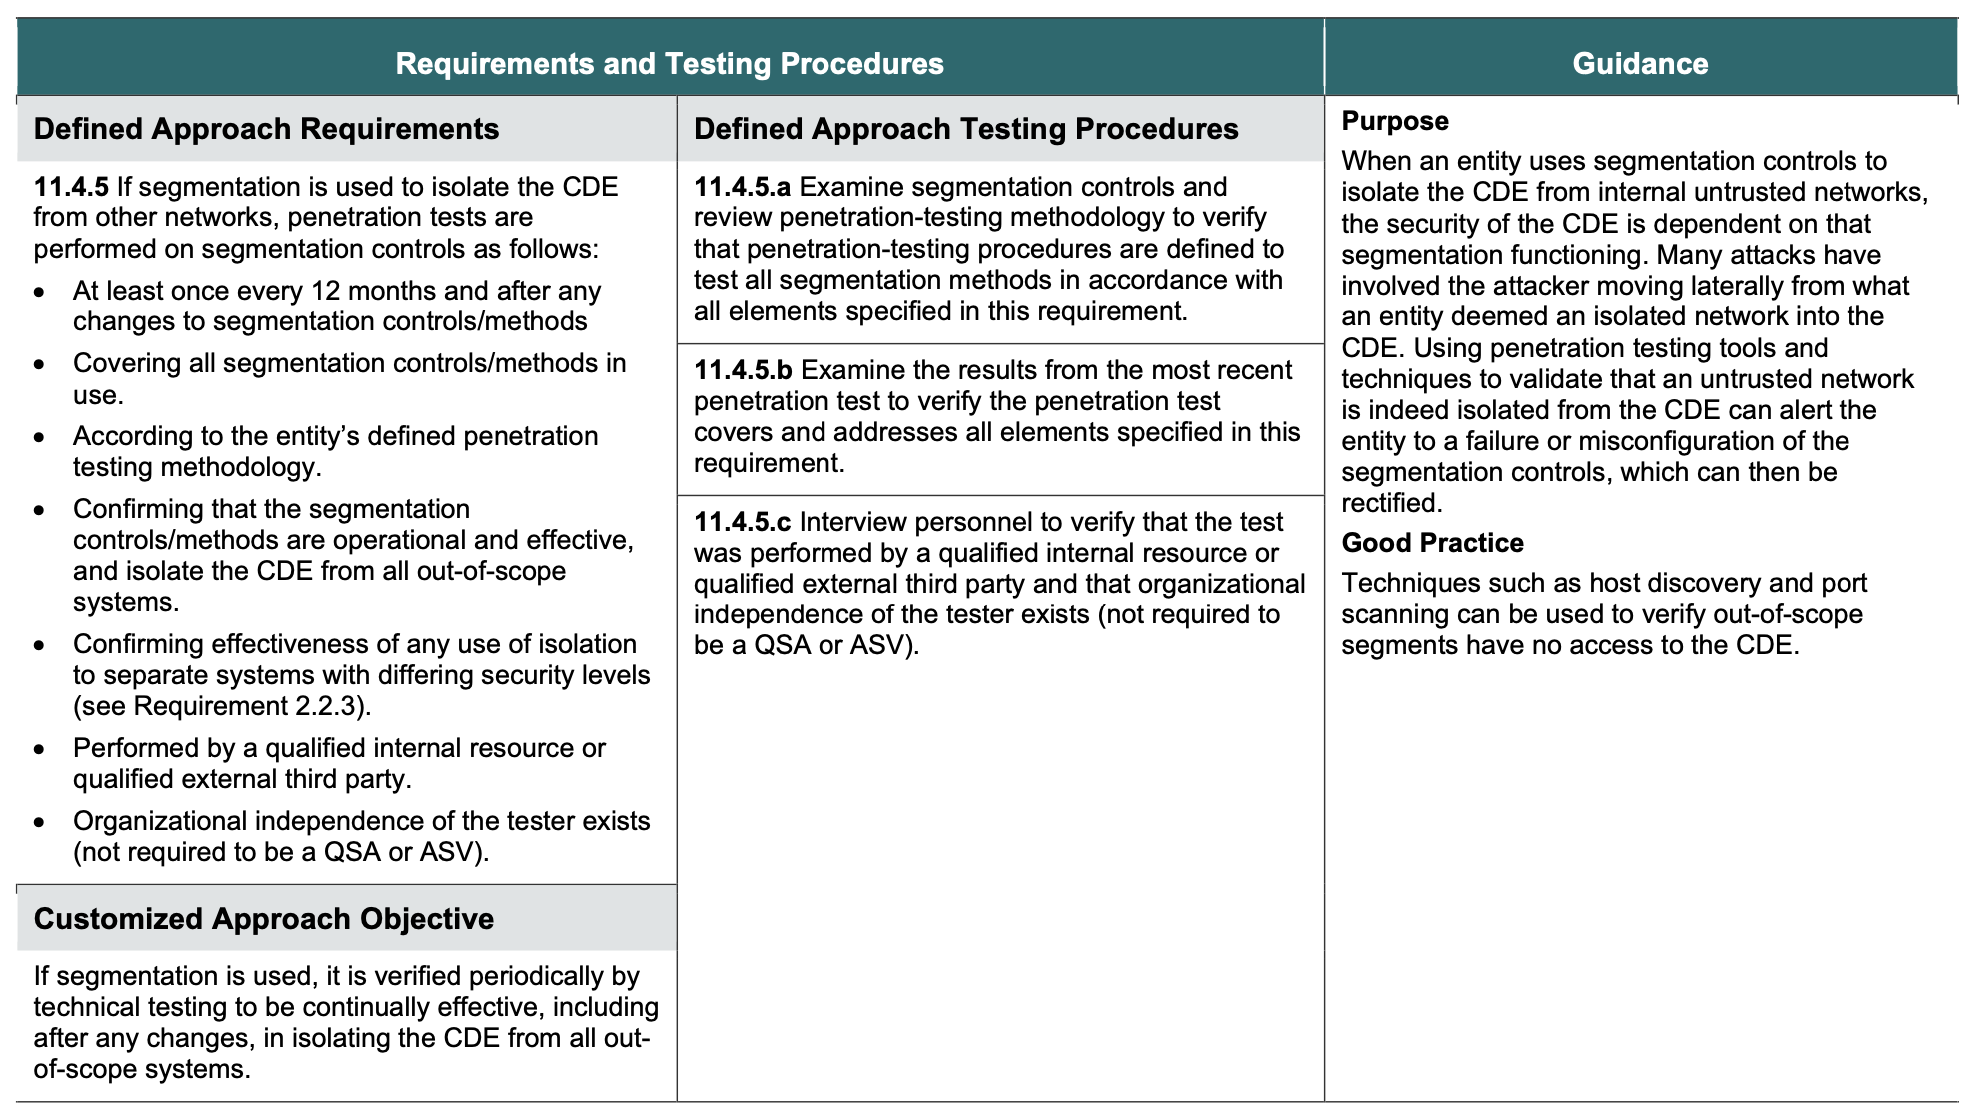 Requirements and Testing Procedures